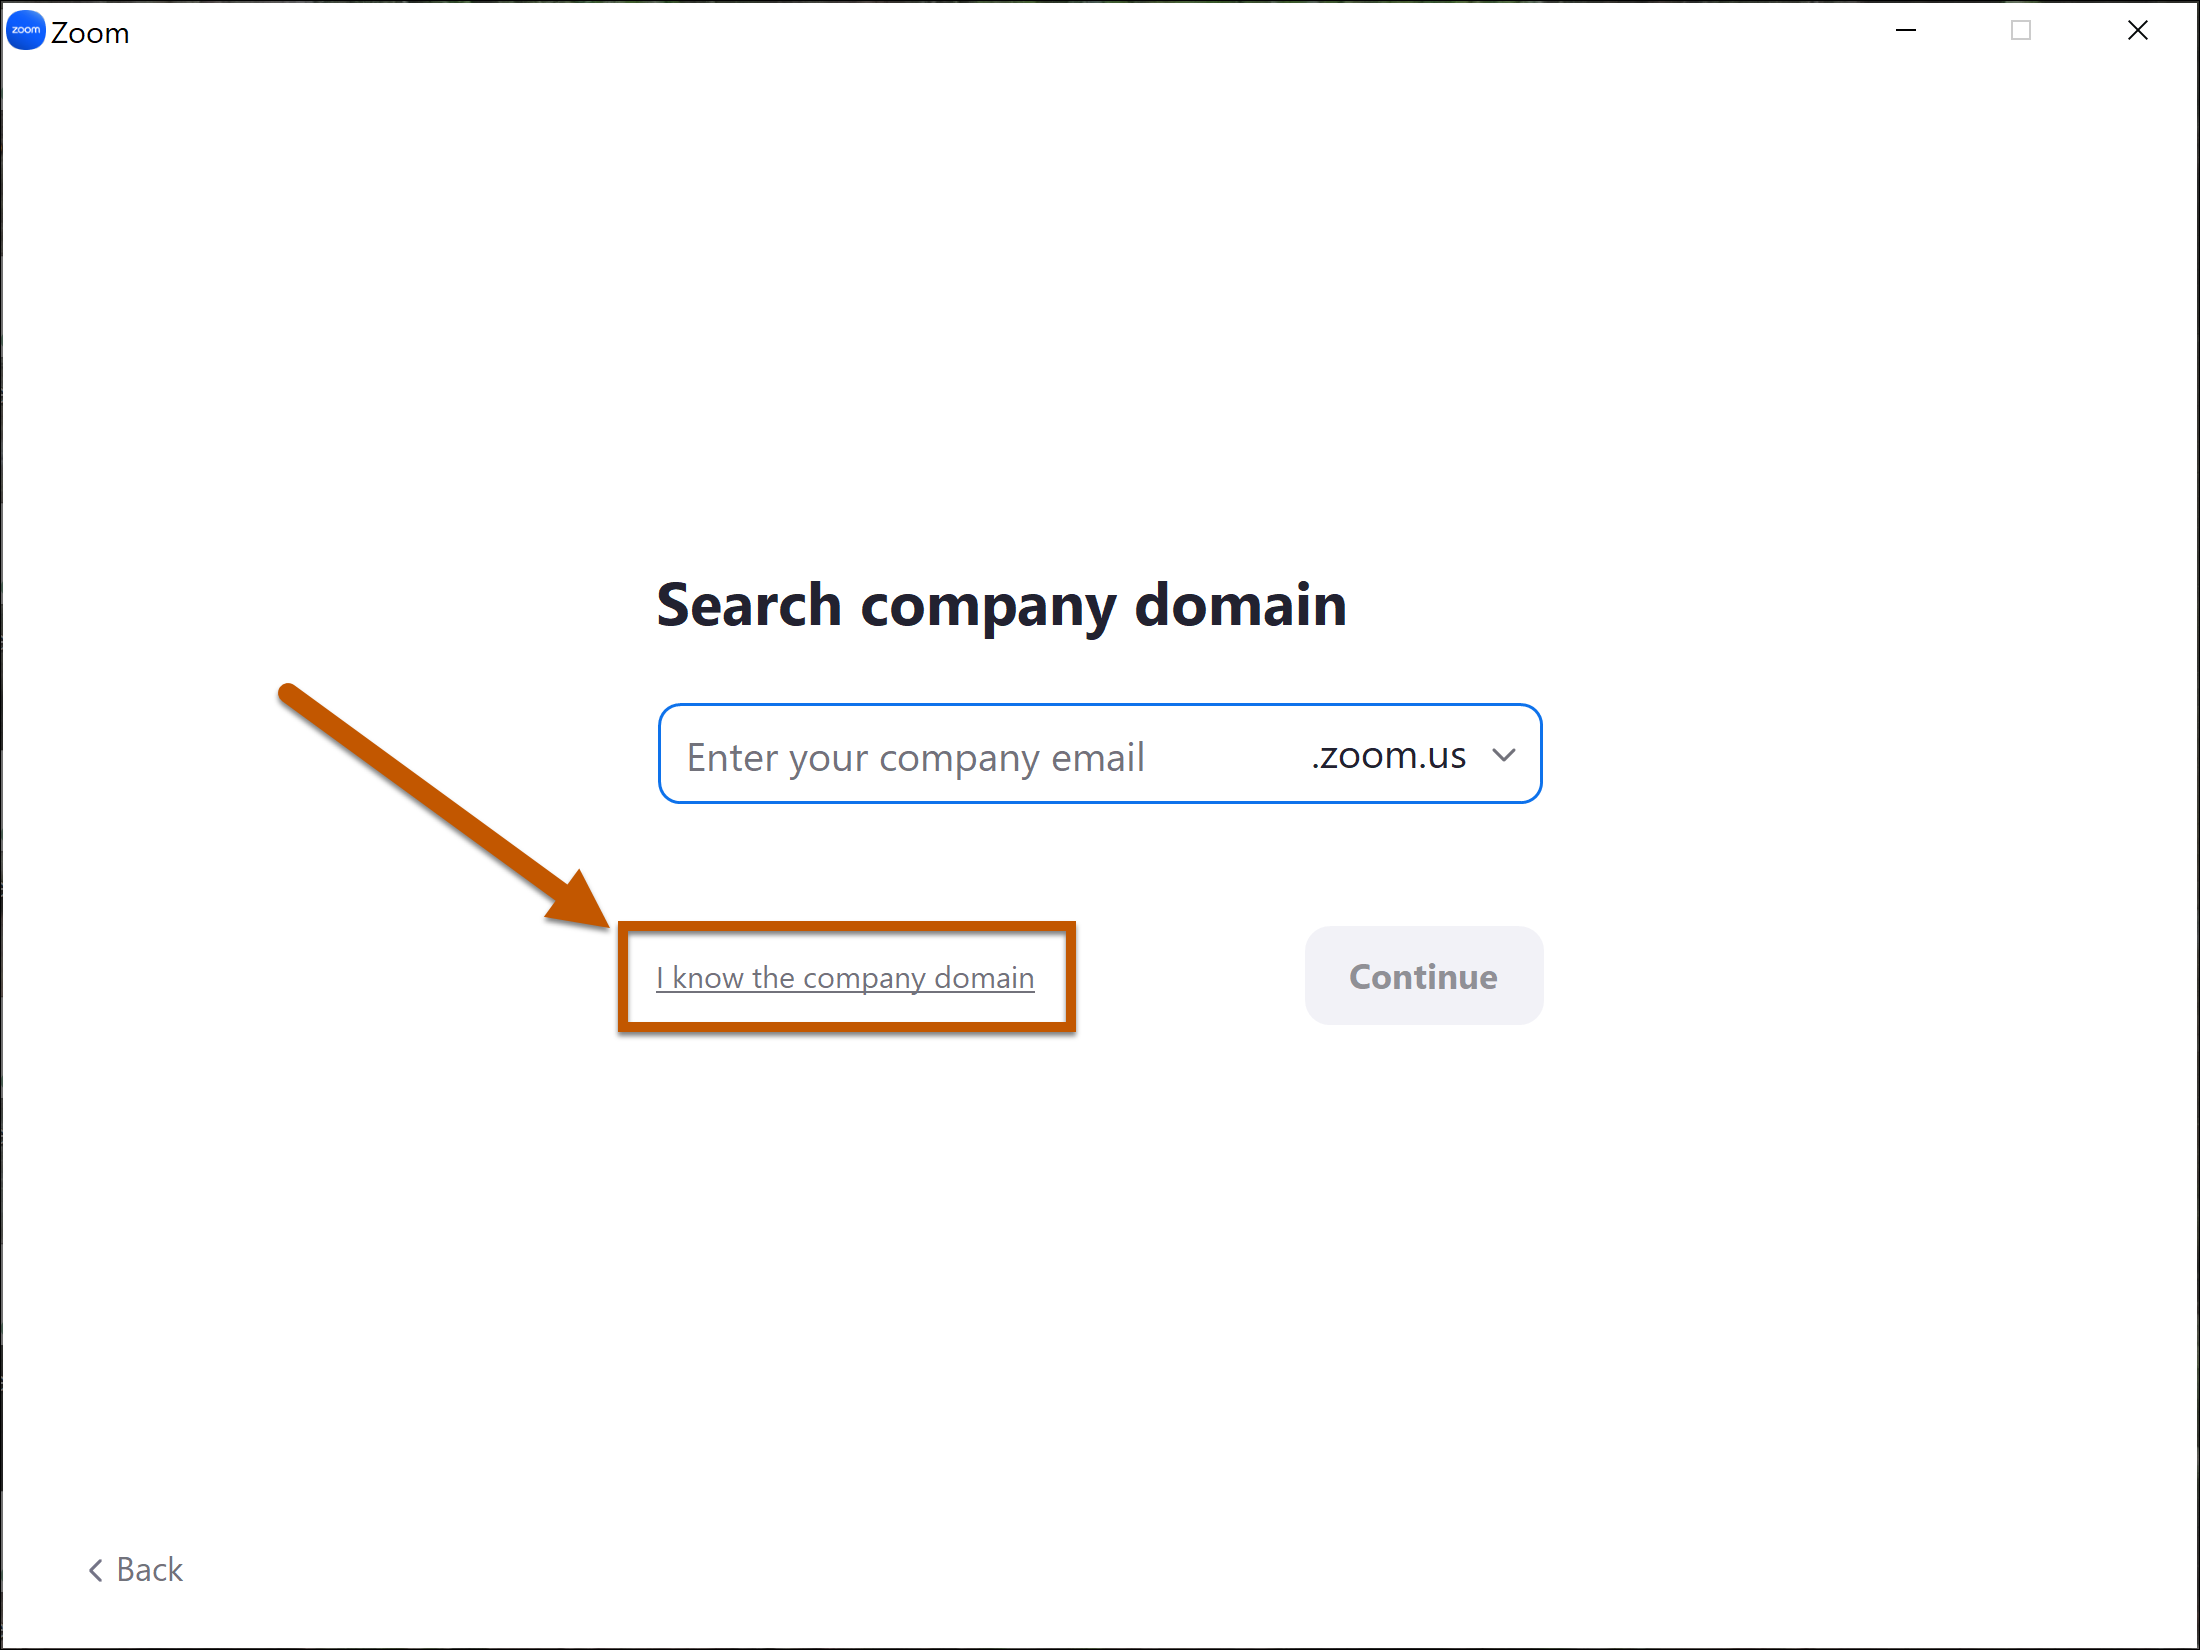 Click the option that allows you to specify the company domain.